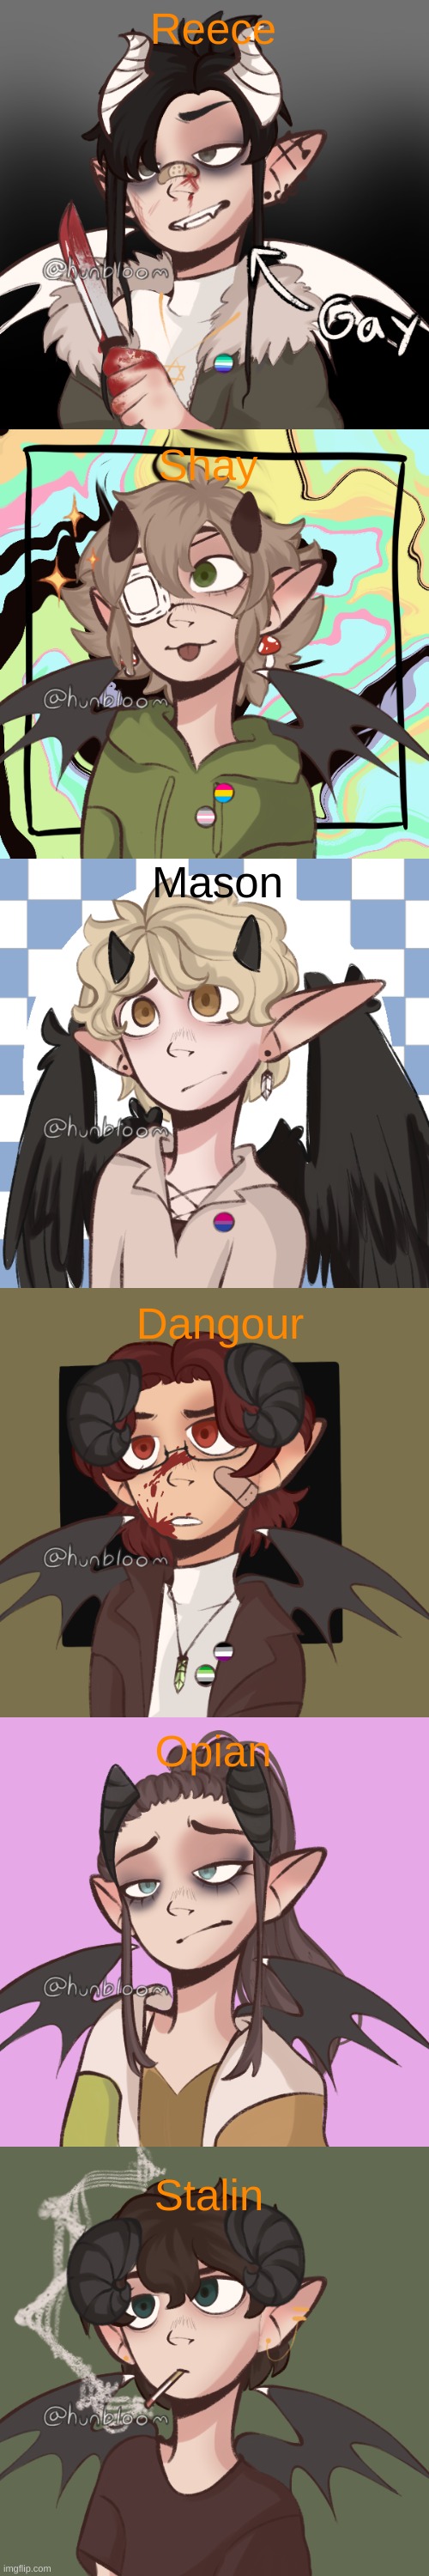 All of my current OCs that I use mainly for my roleplays | Reece; Shay; Mason; Dangour; Opian; Stalin | image tagged in reference,ocs,lore,demons,angels | made w/ Imgflip meme maker